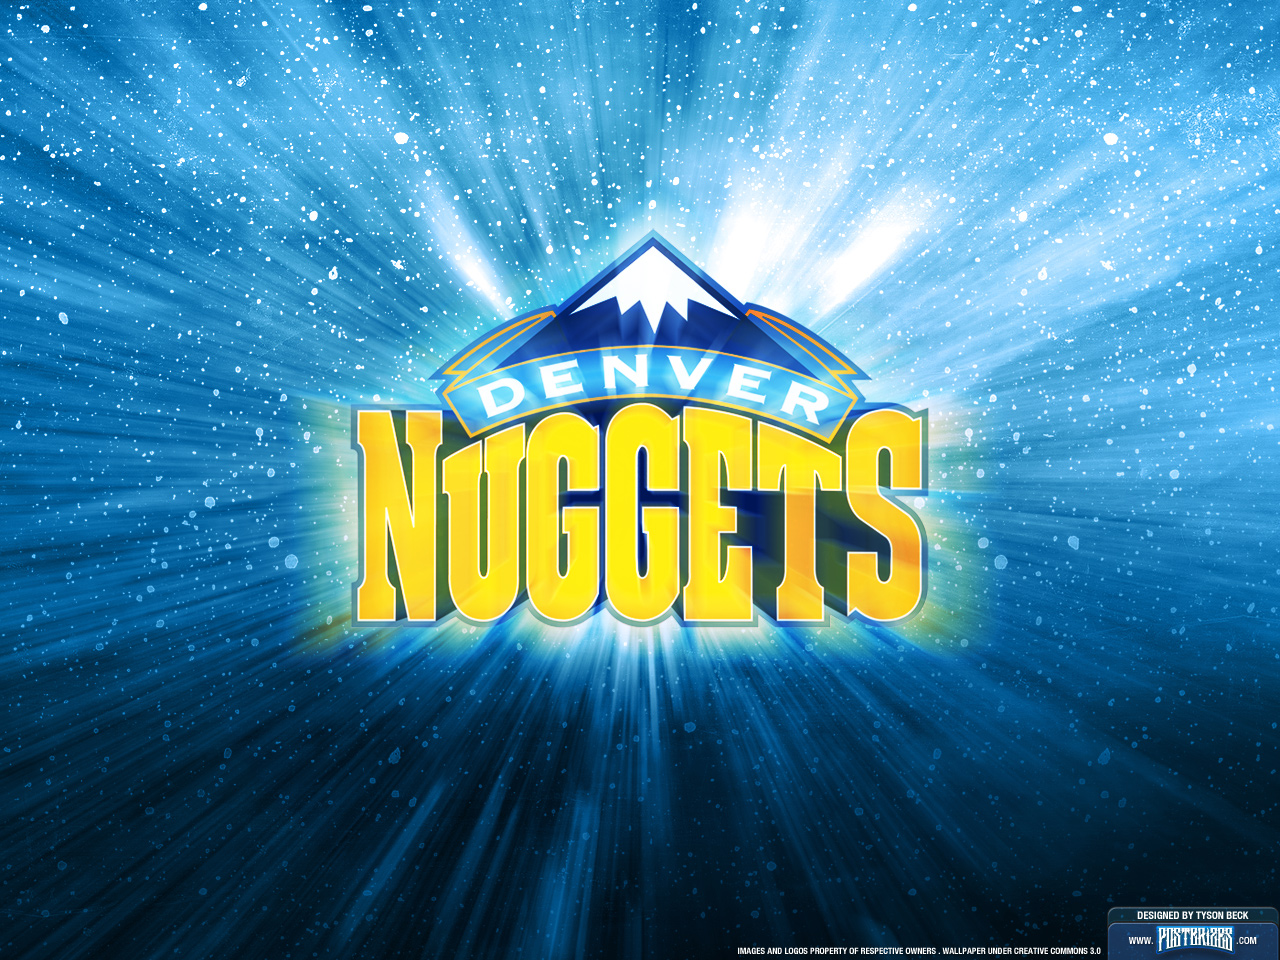 Cancer awareness group helps Nuggets fans save lives • Love Hope Strength Foundation